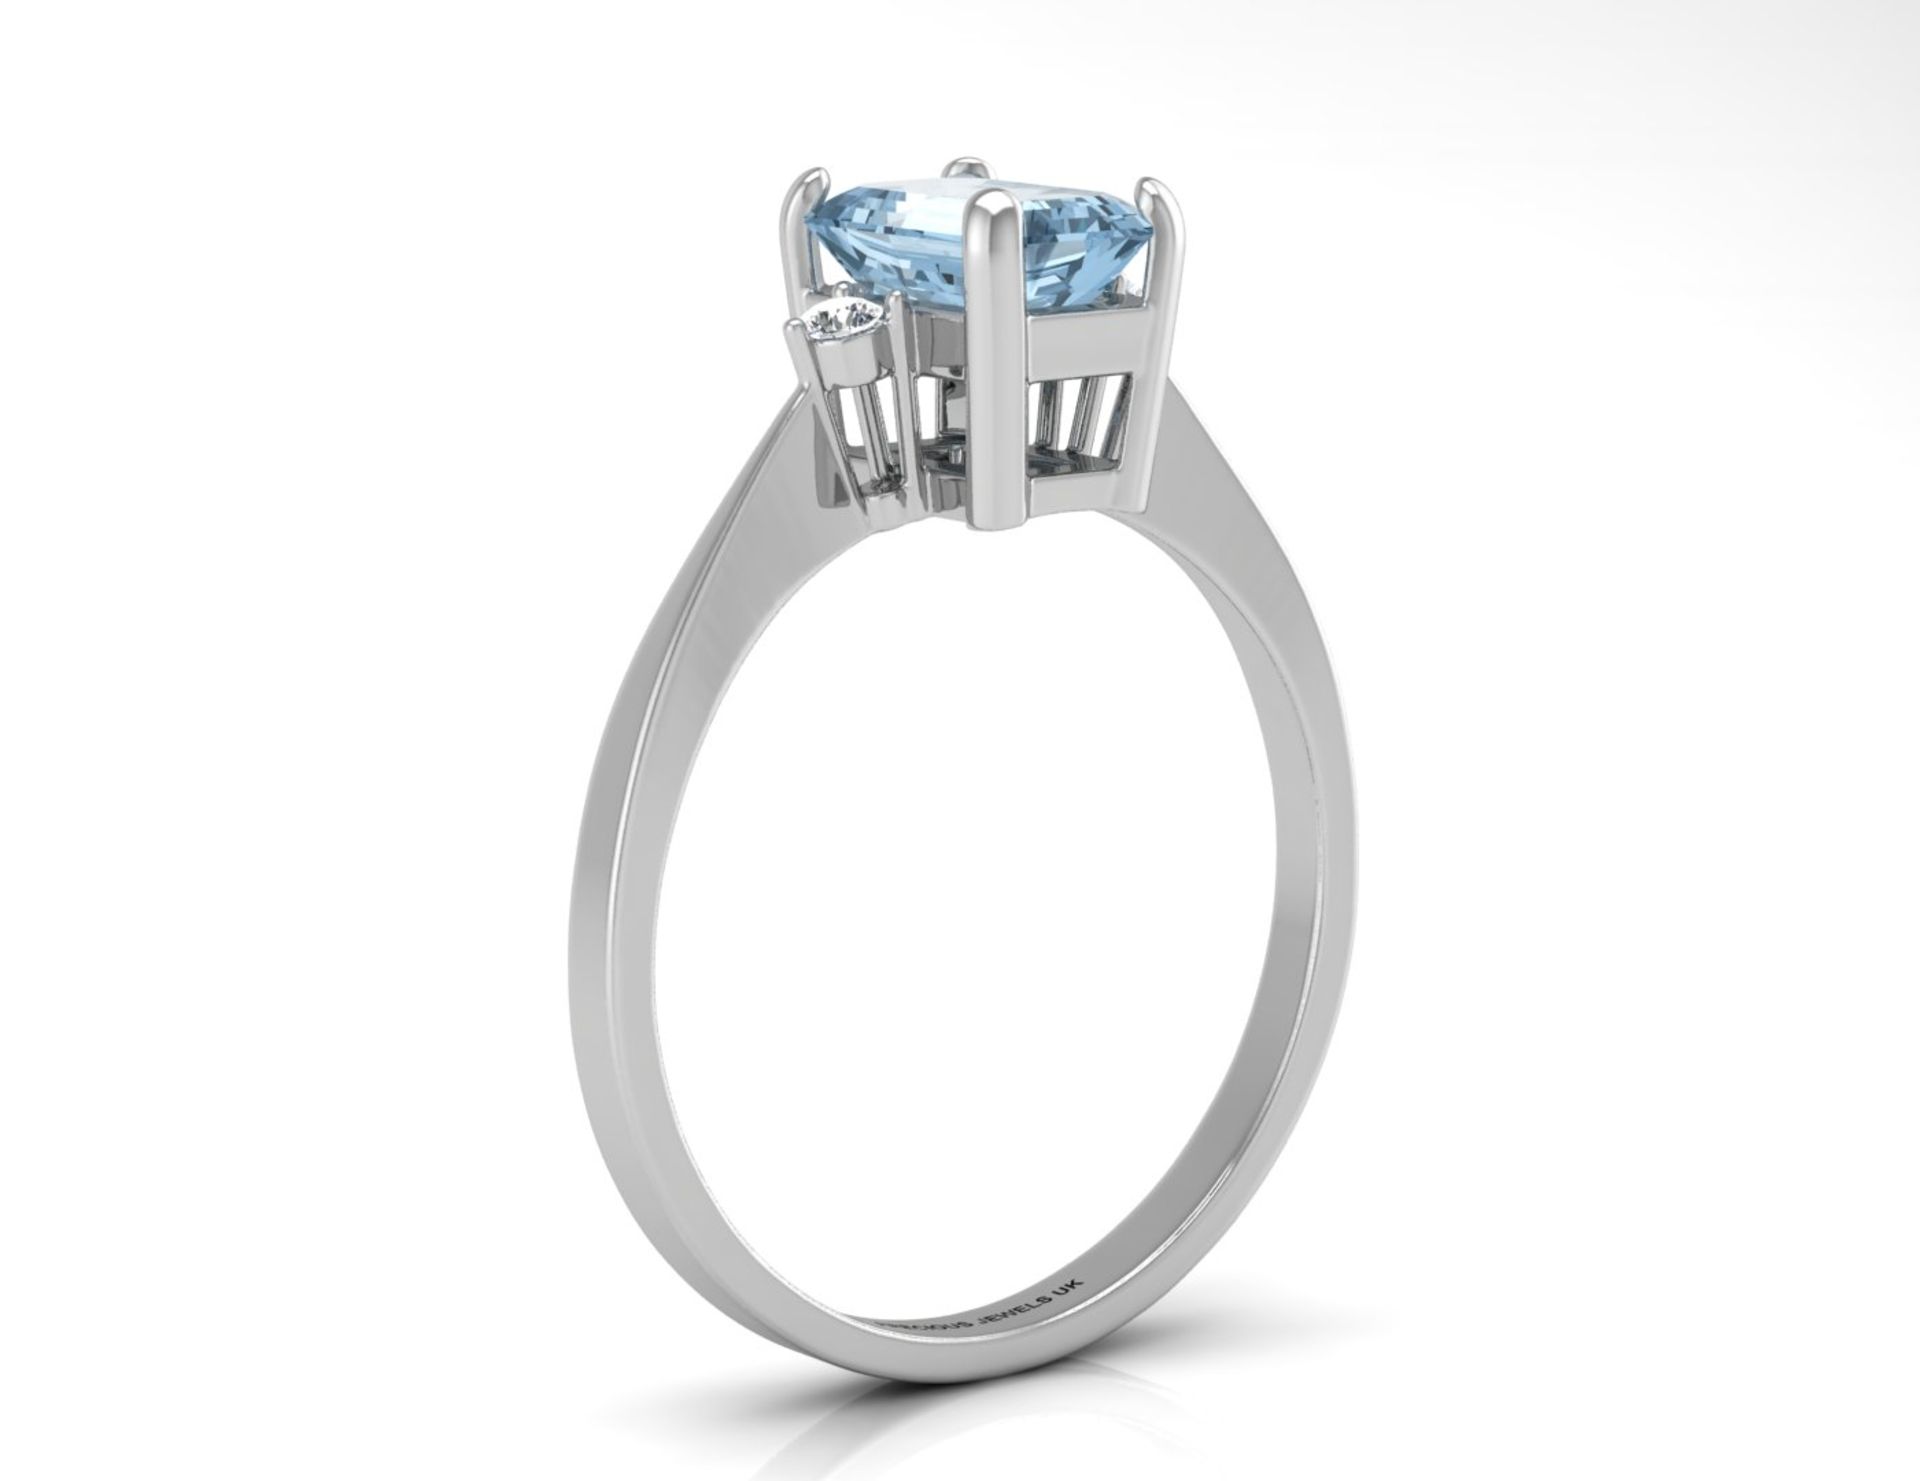 9ct White Gold Diamond And Emerald Cut Blue Topaz Ring 0.04 Carats - Valued by GIE £1,245.00 - An - Image 2 of 5